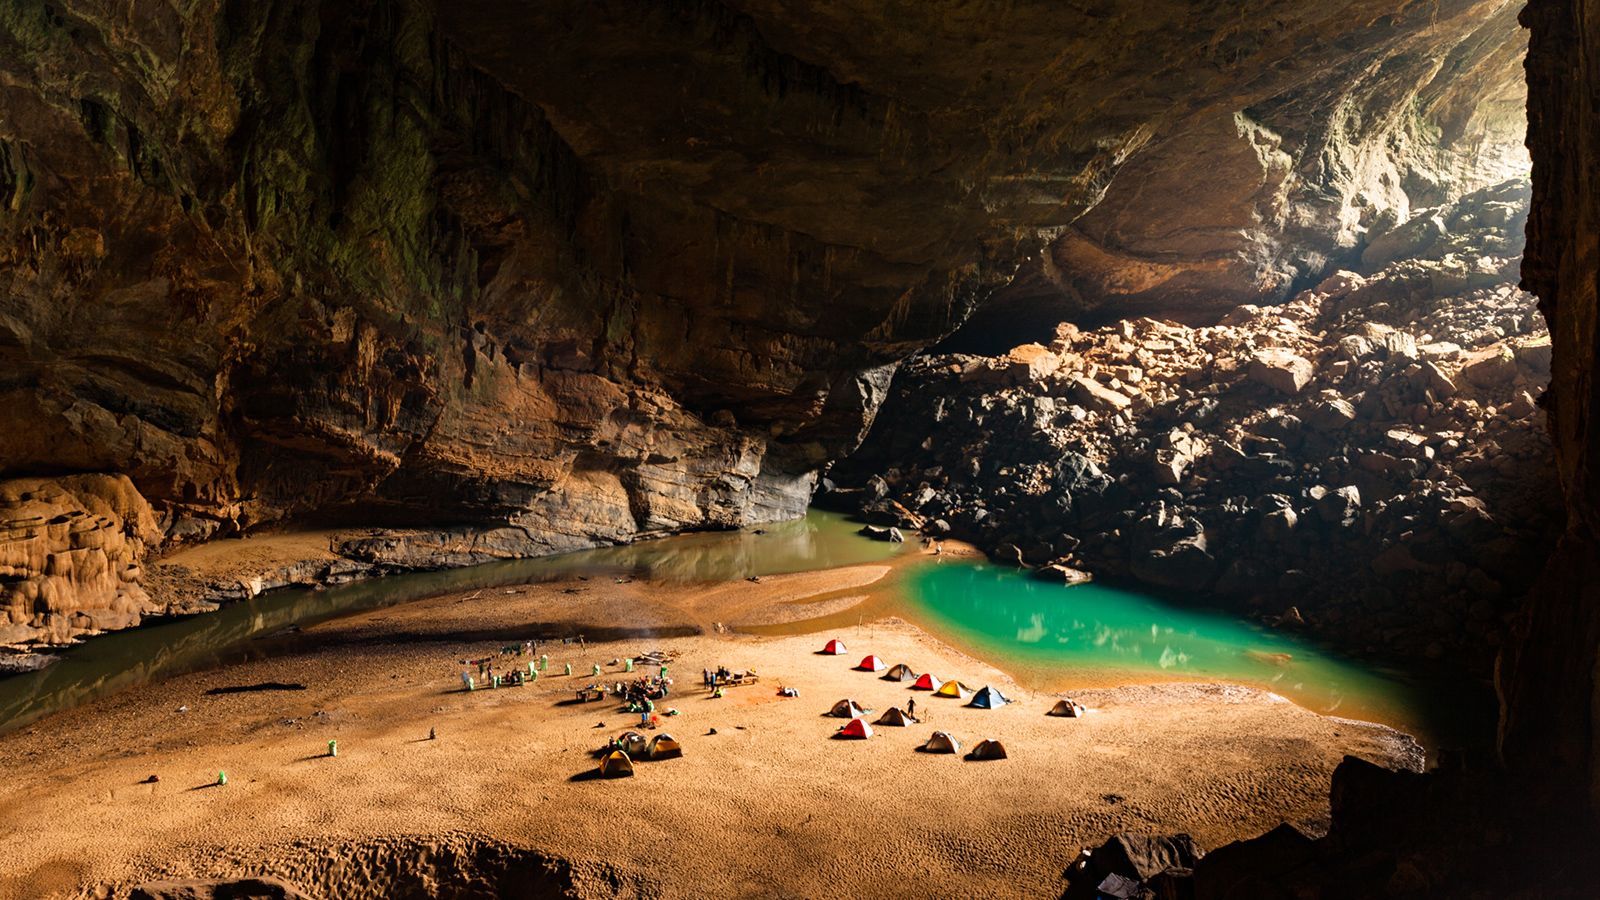 Phong Nha is the gateway to Hang Son Doong, the world's largest cave